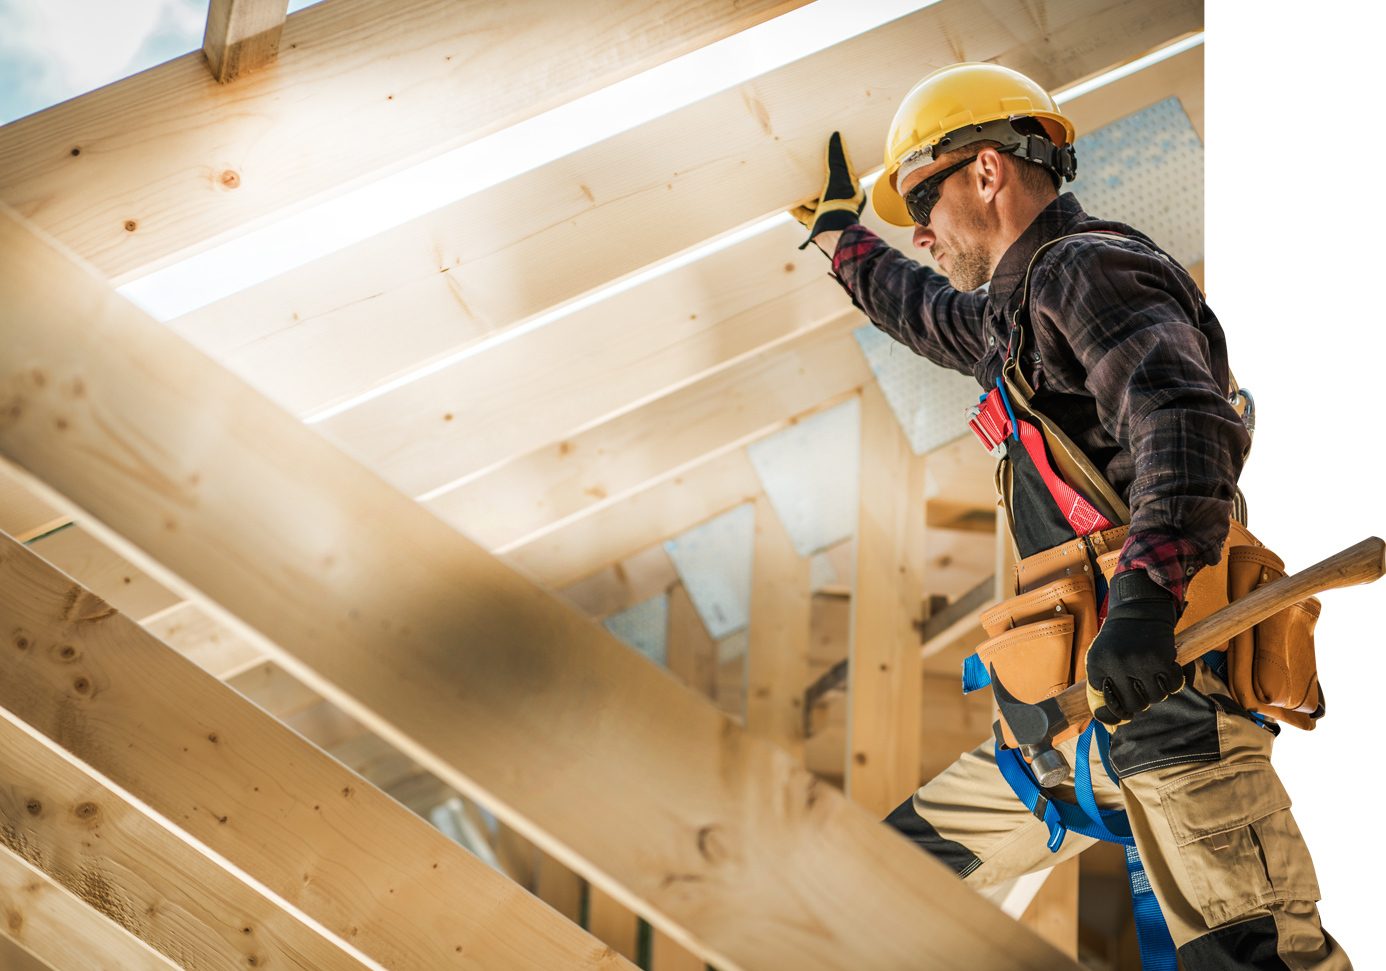 Closeup of a roofer in full construction gear in the beams of a roof construction